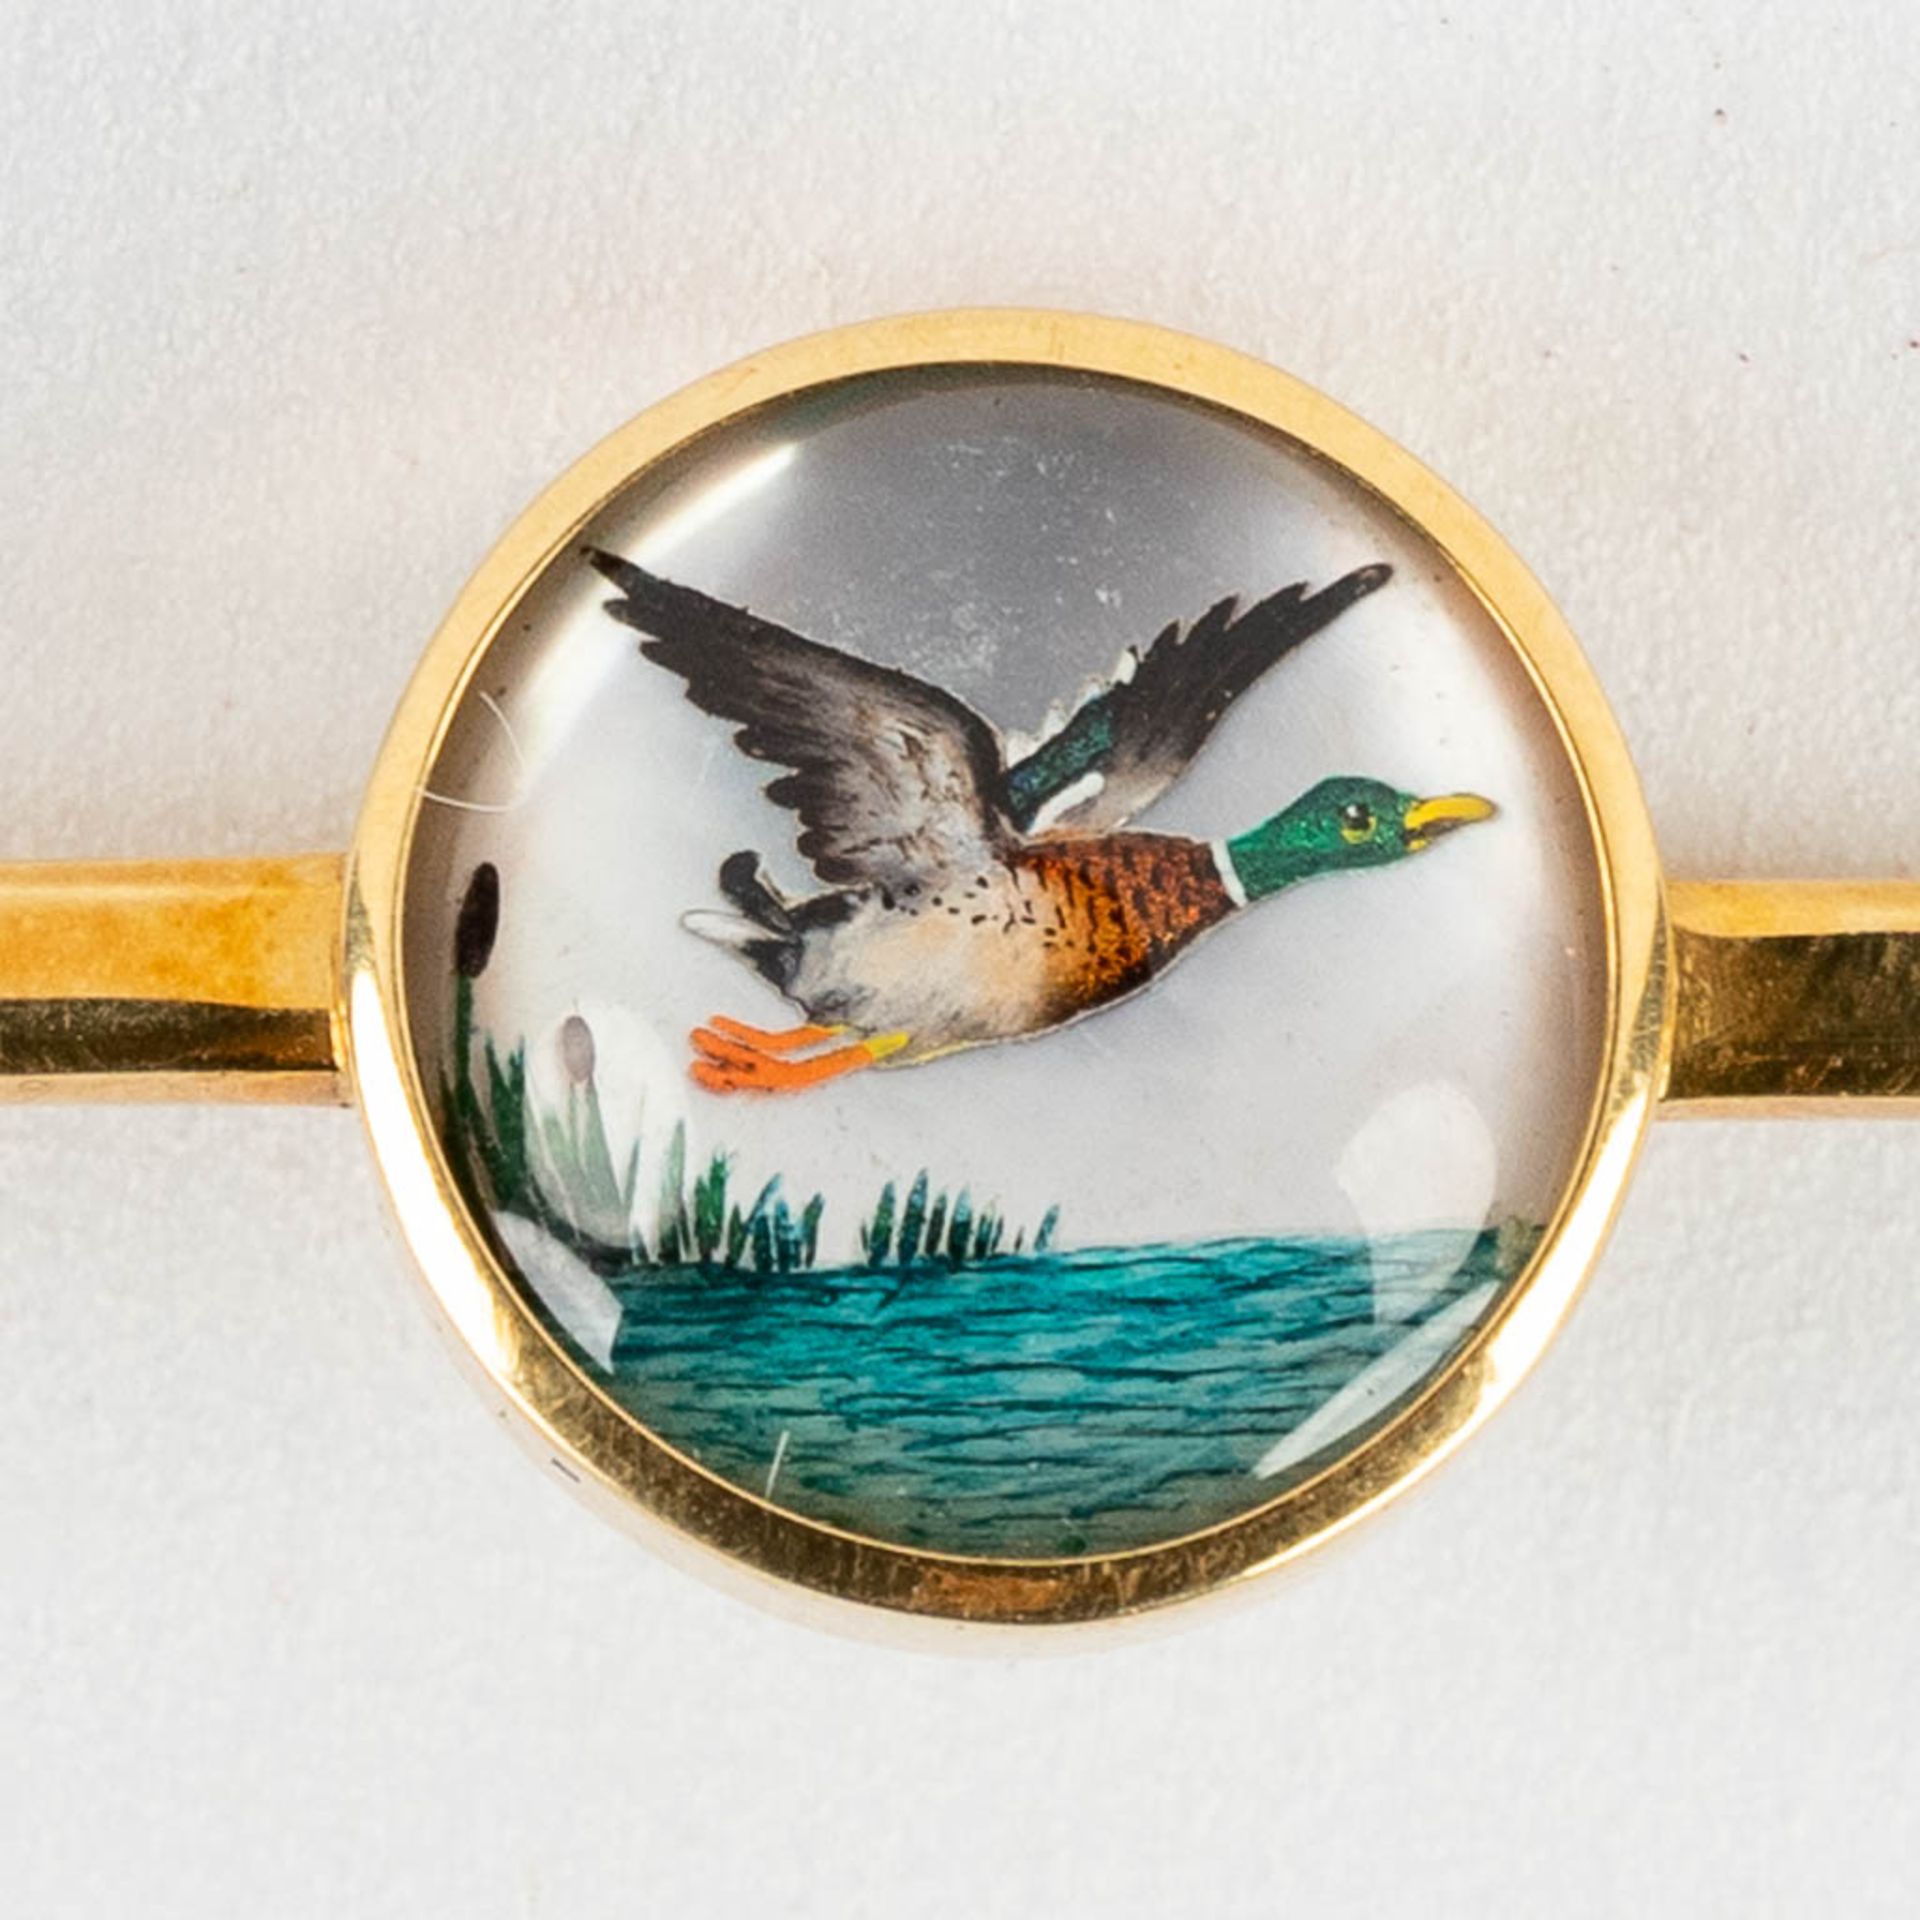 An antique brooch decorated with a miniature duck/mallard image. 18kt gold. - Image 6 of 8